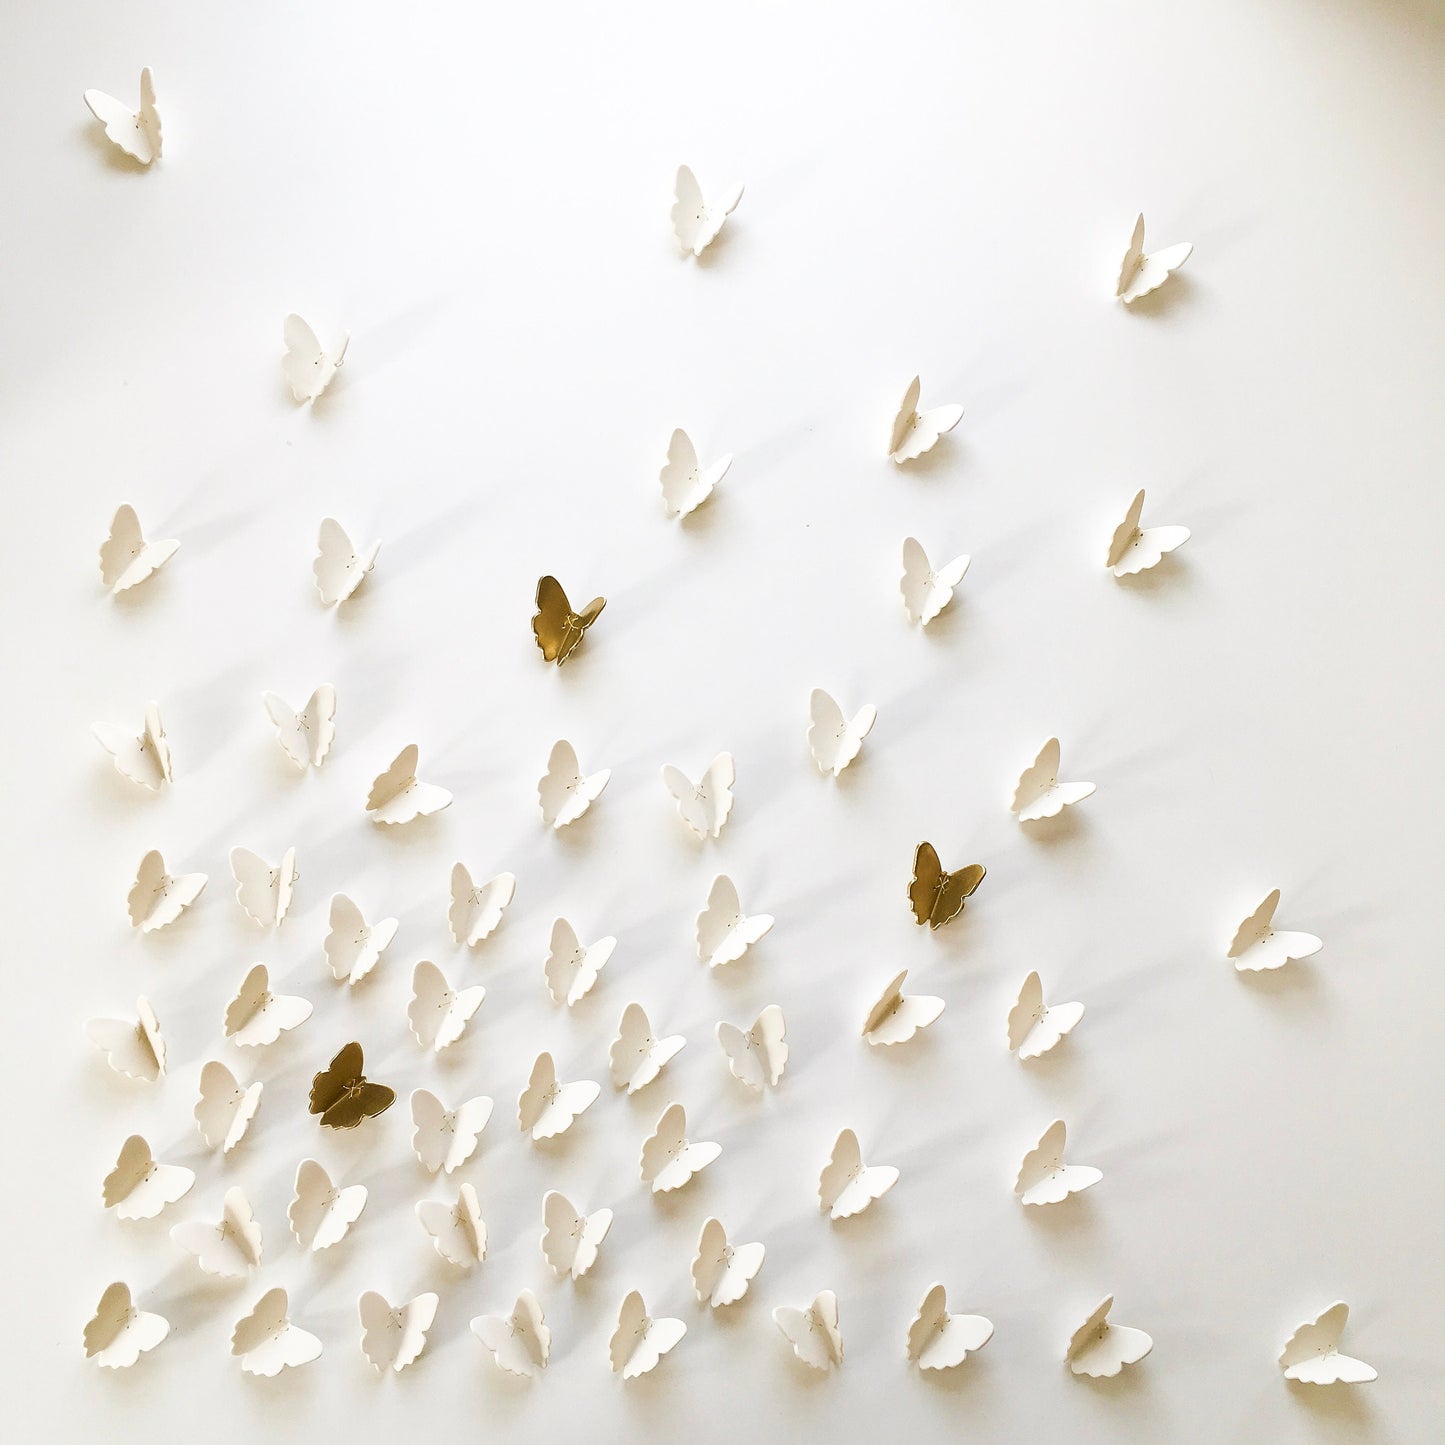 Extra large wall art 3D Butterfly Set of 55 Original white porcelain + gold ceramic butterflies sculpture with metal wire (52 white 3 gold)